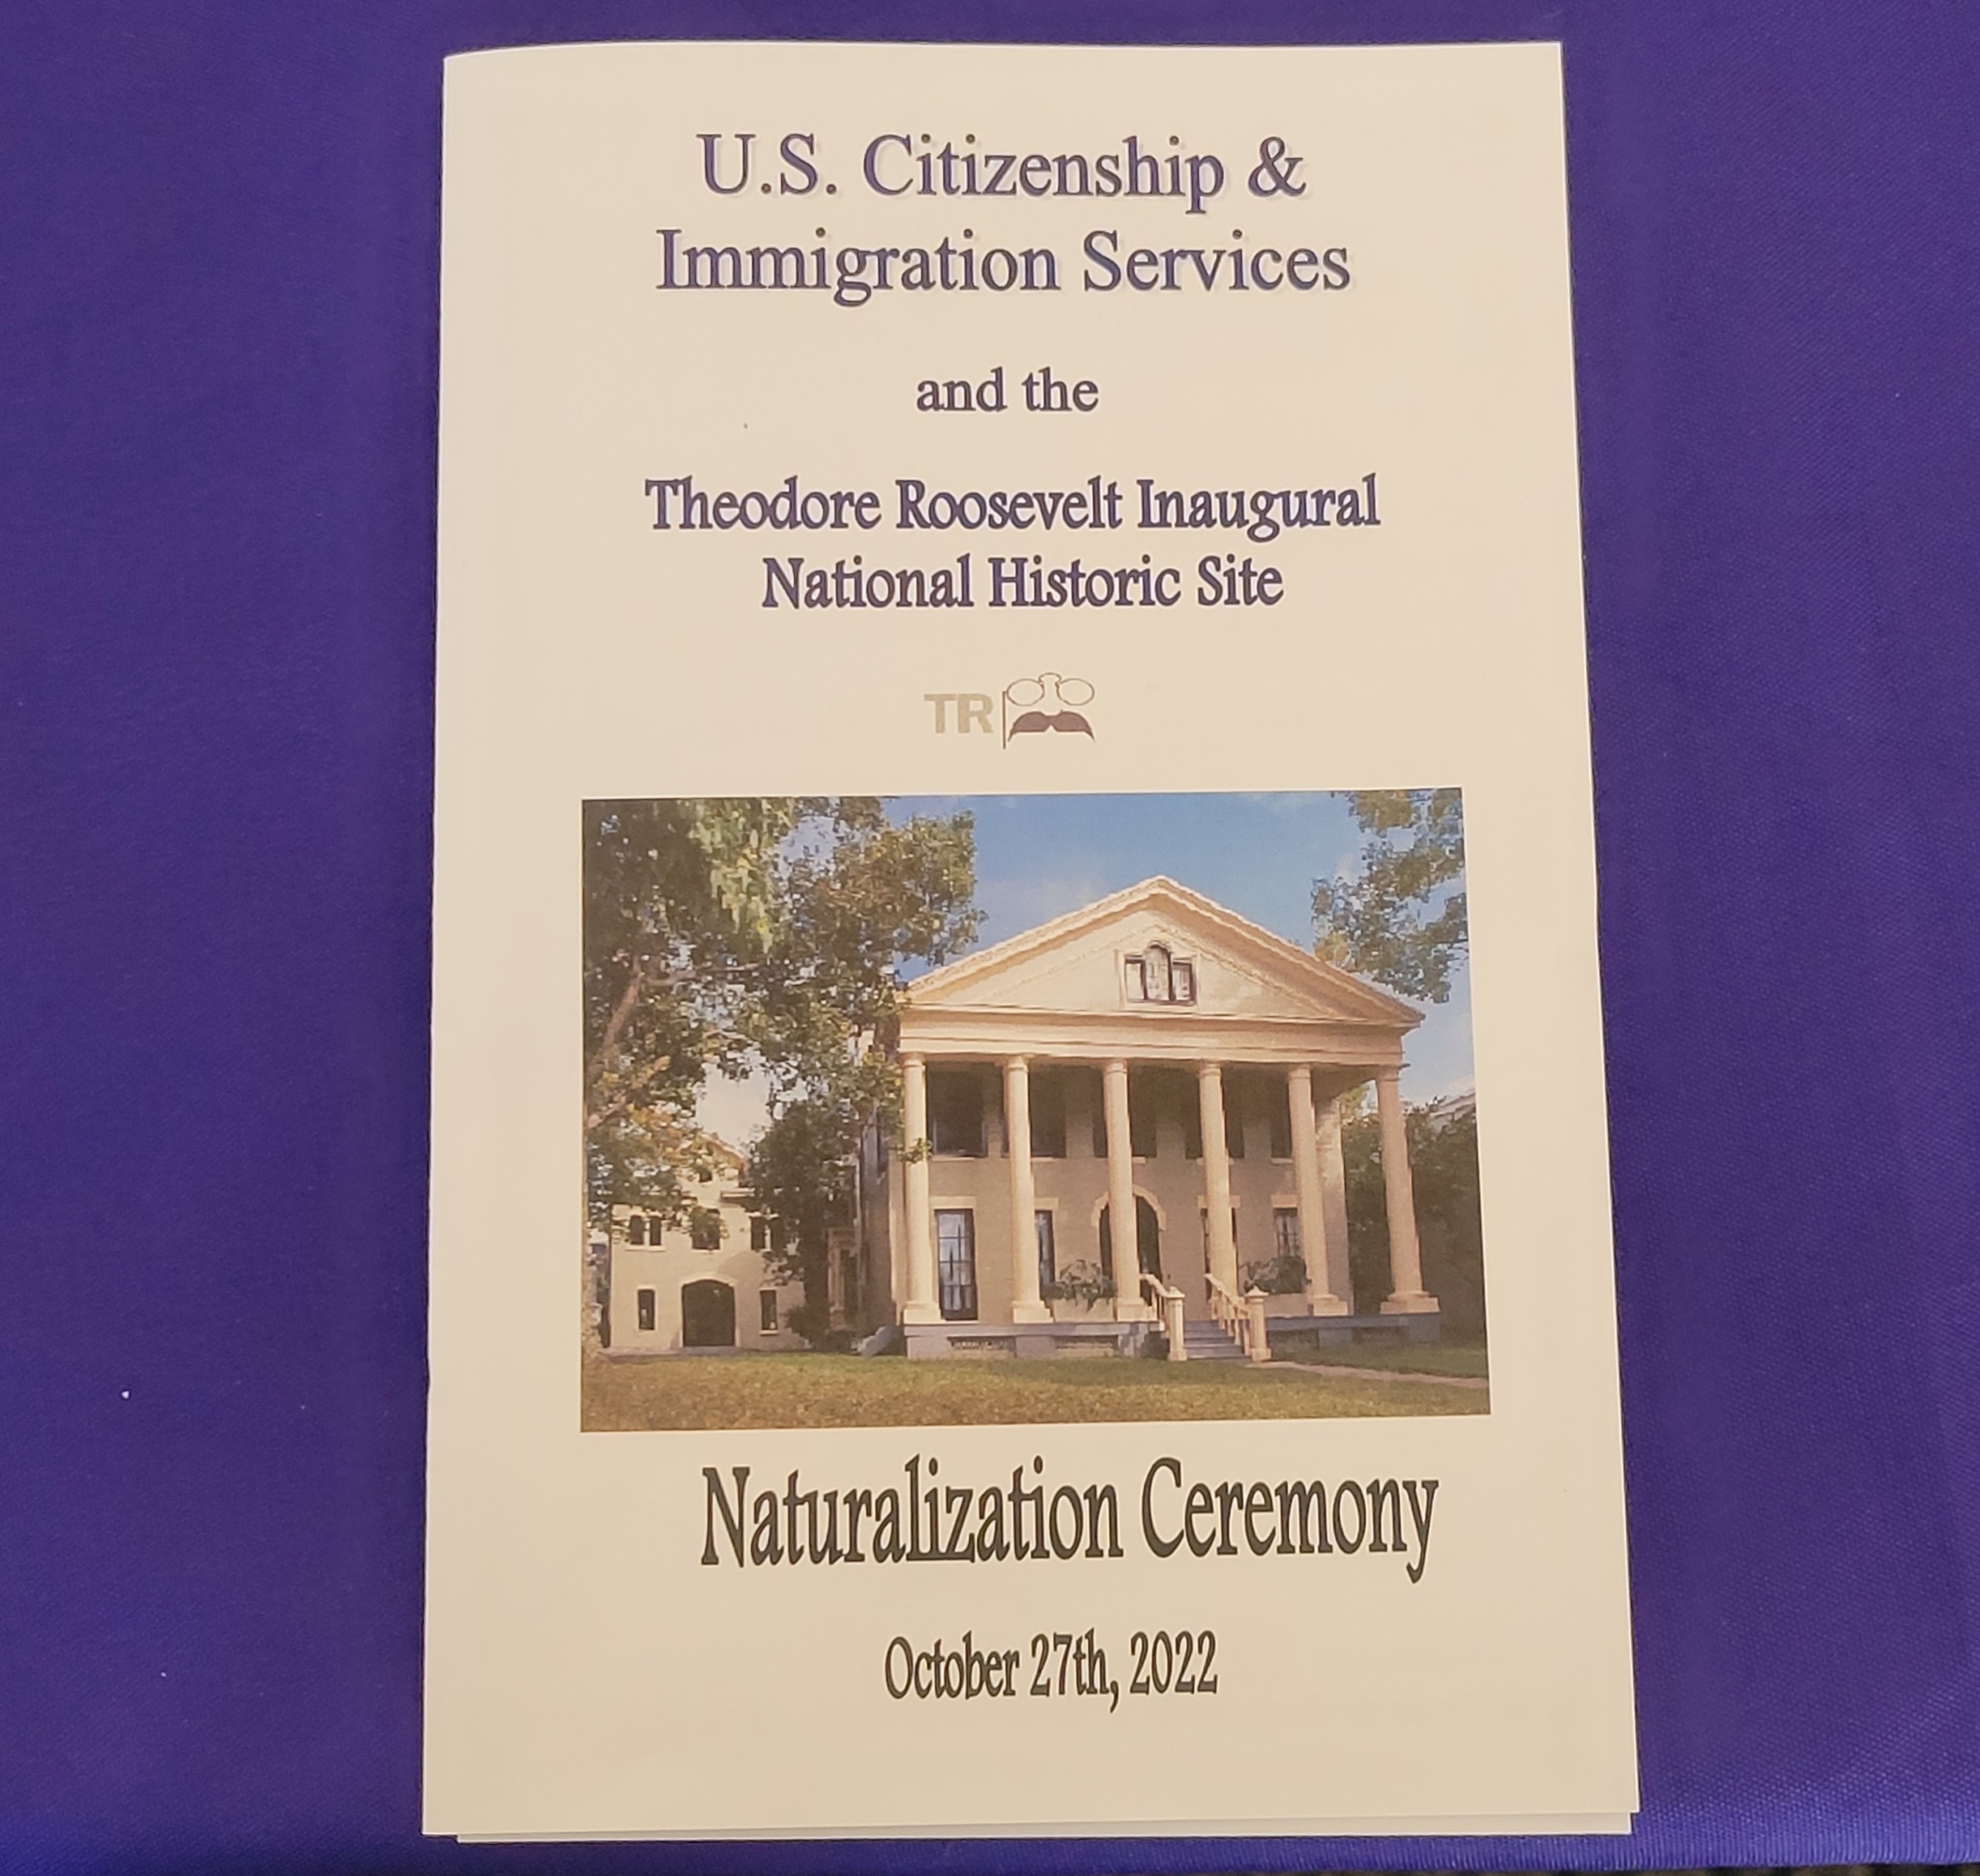 the program from the Swearing in Ceremony